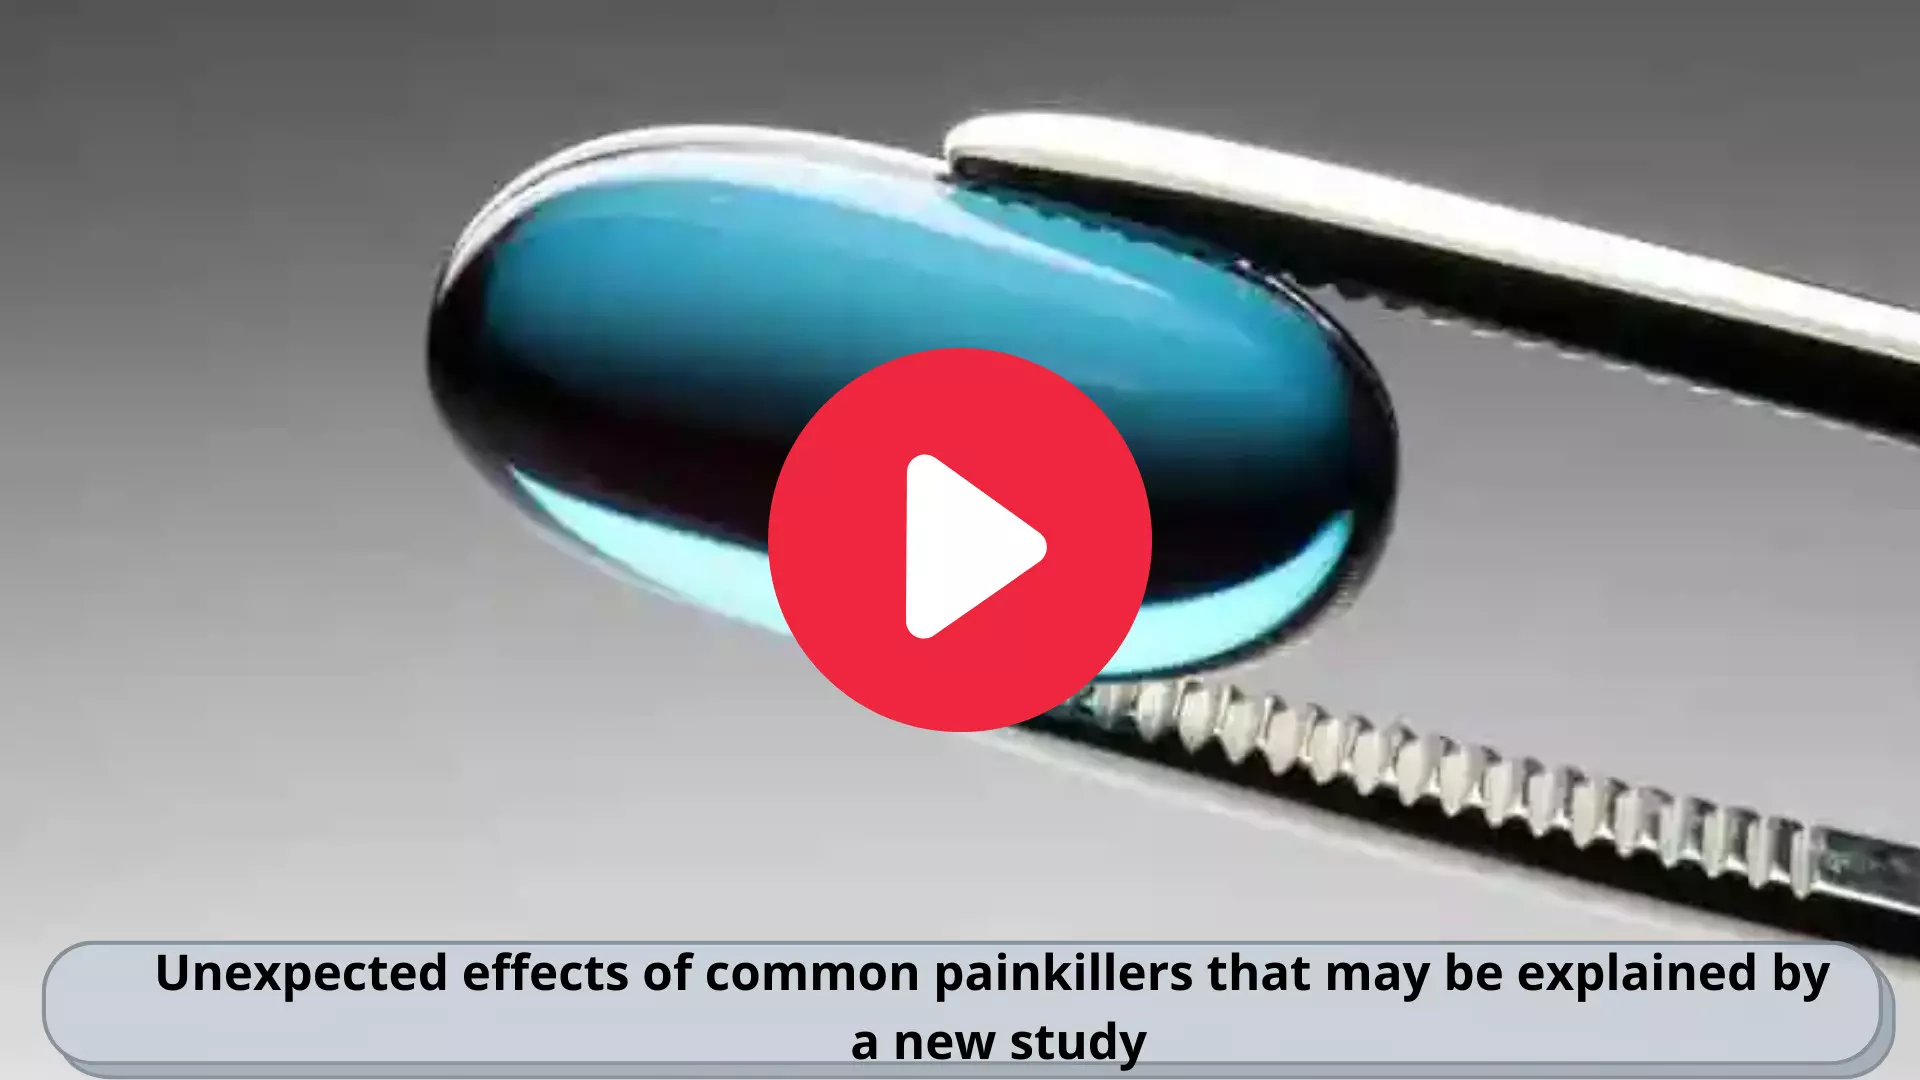 Unexpected effects of common painkillers that may be explained by a new study